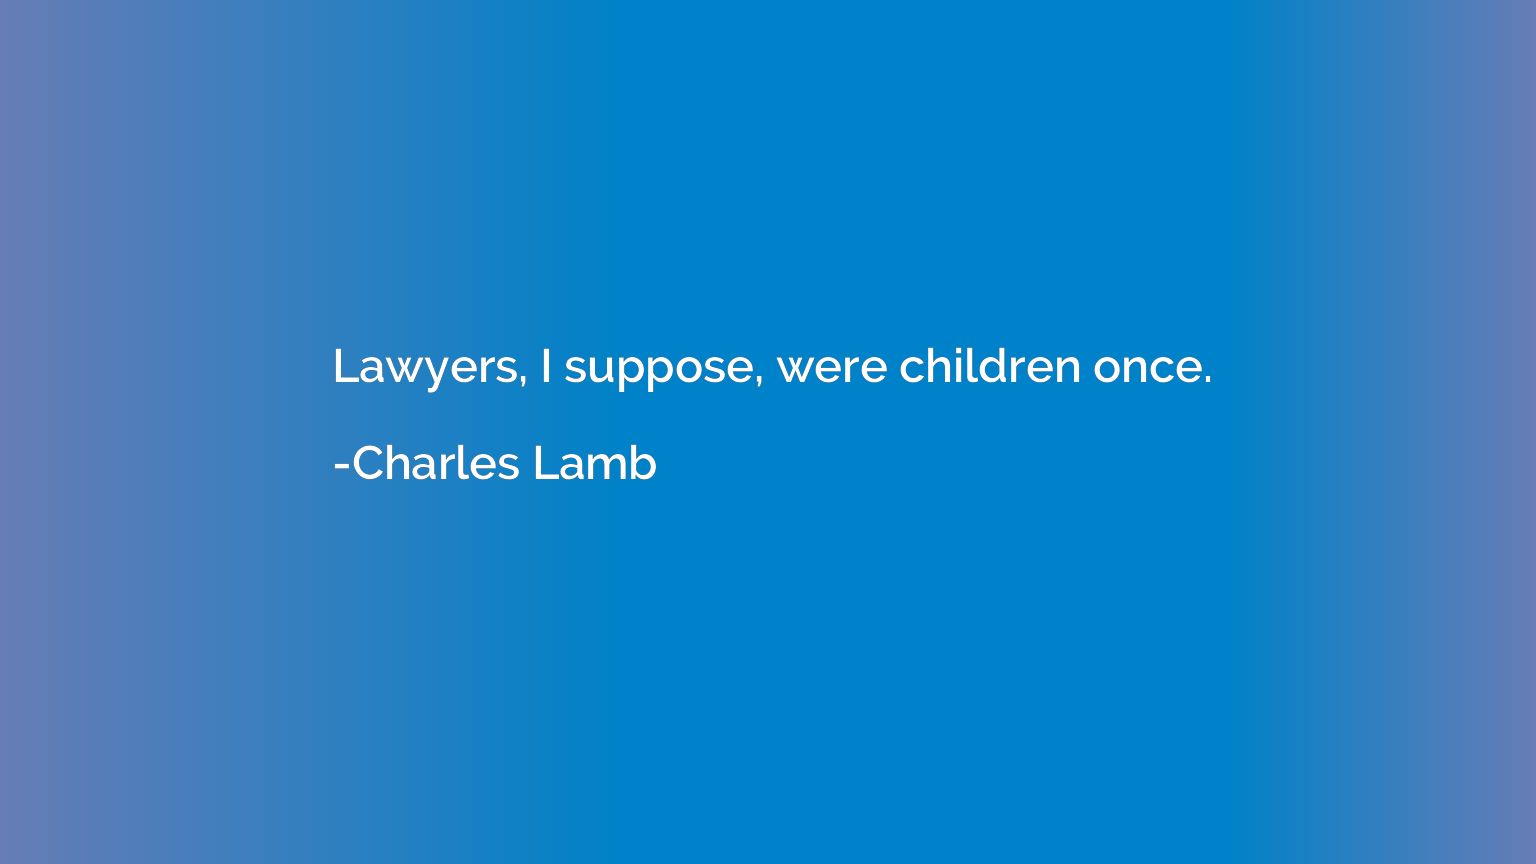 Lawyers, I suppose, were children once.